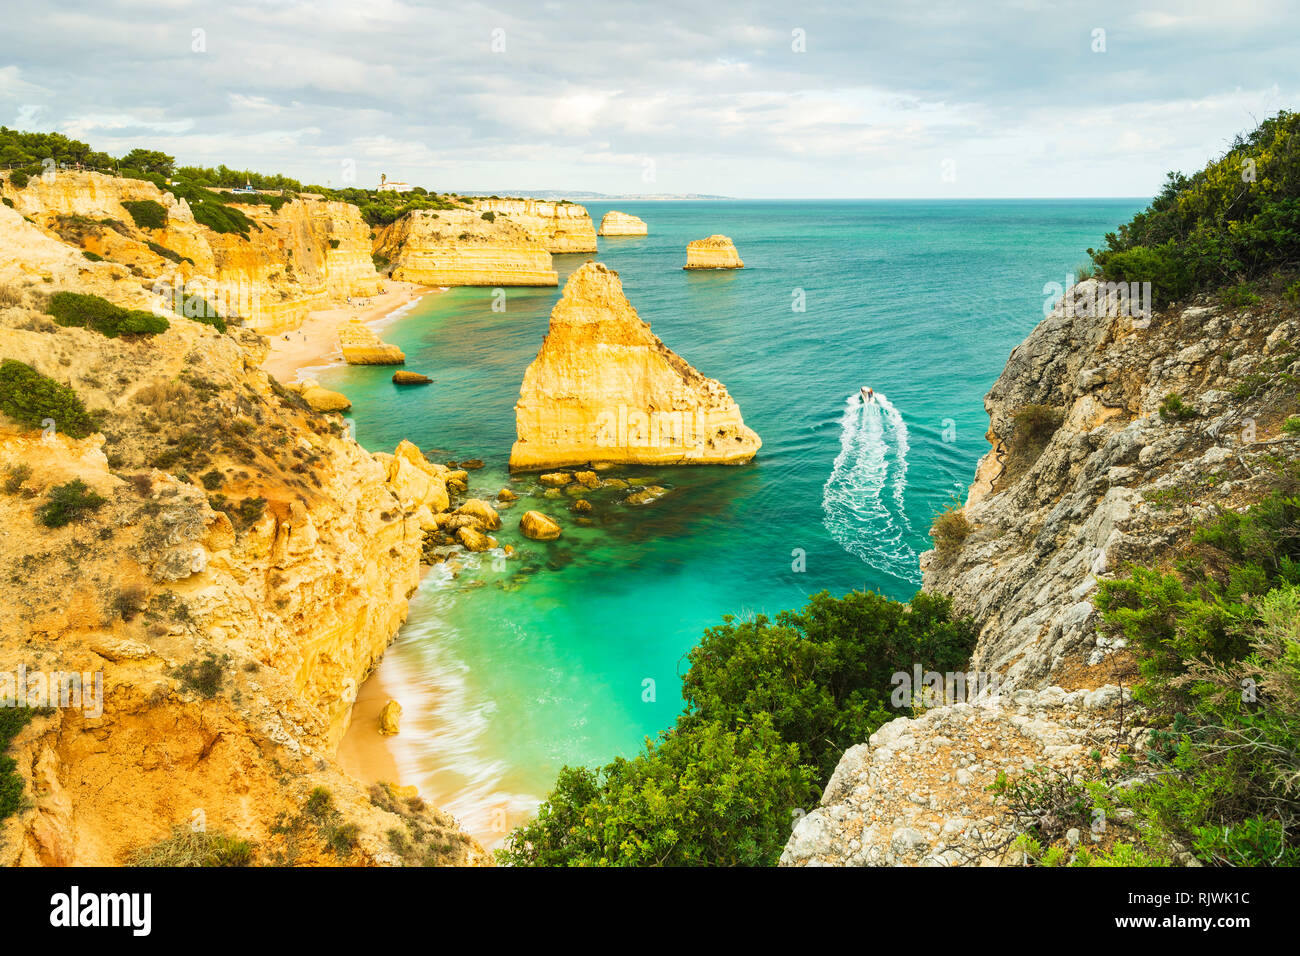 Boat sailing on sea by cliffs and rock formations, high level view, Praia da Marinha, Algarve. Portugal, Europe Stock Photo